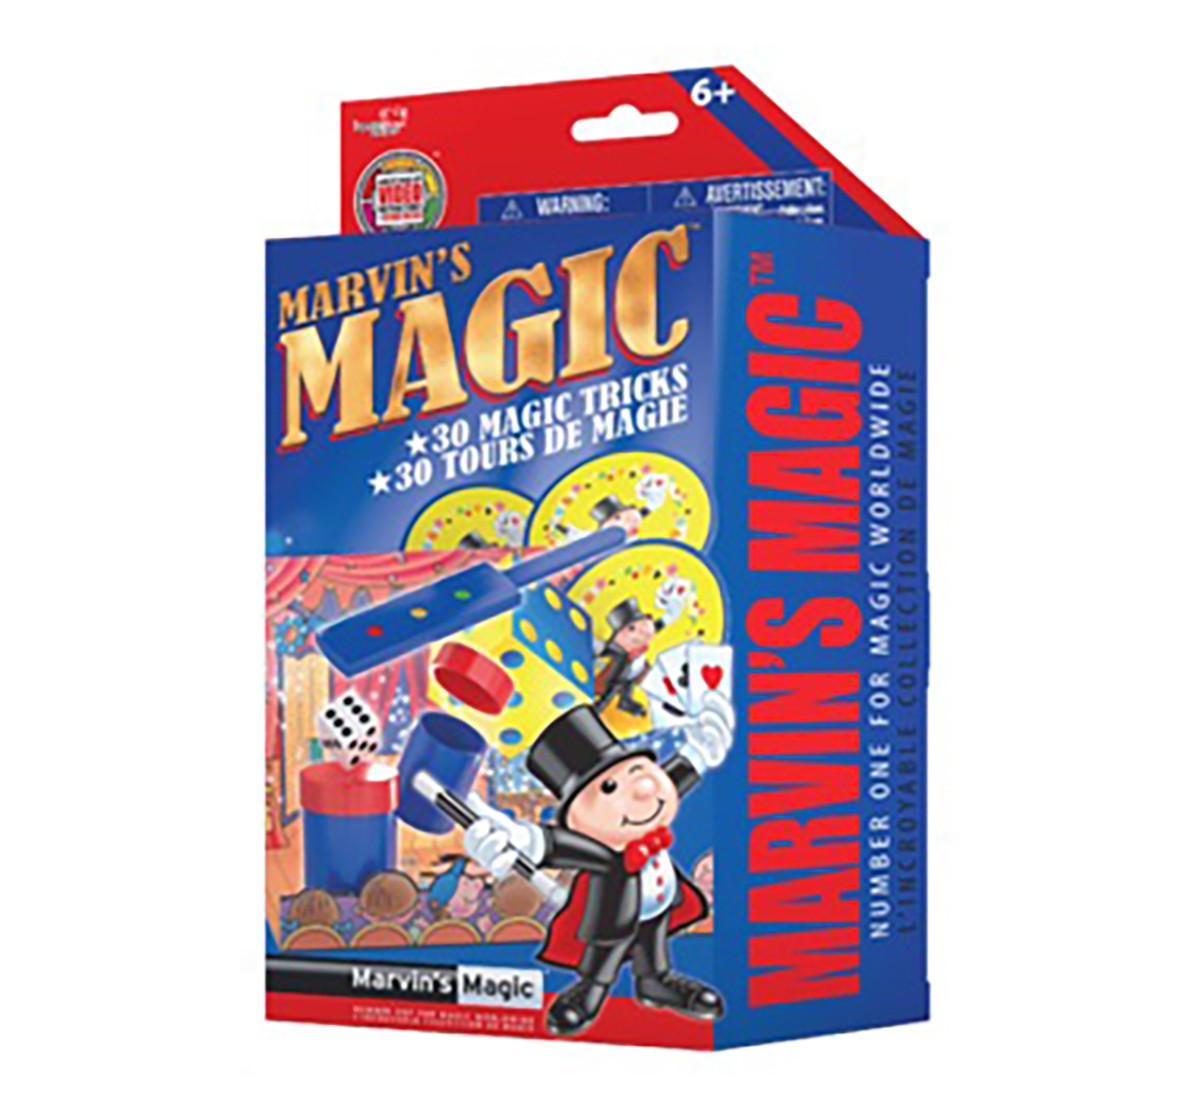 Marvin'S Magic Made Easy 30 Tricks Set 3 Impulse Toys for Kids age 6Y+ 